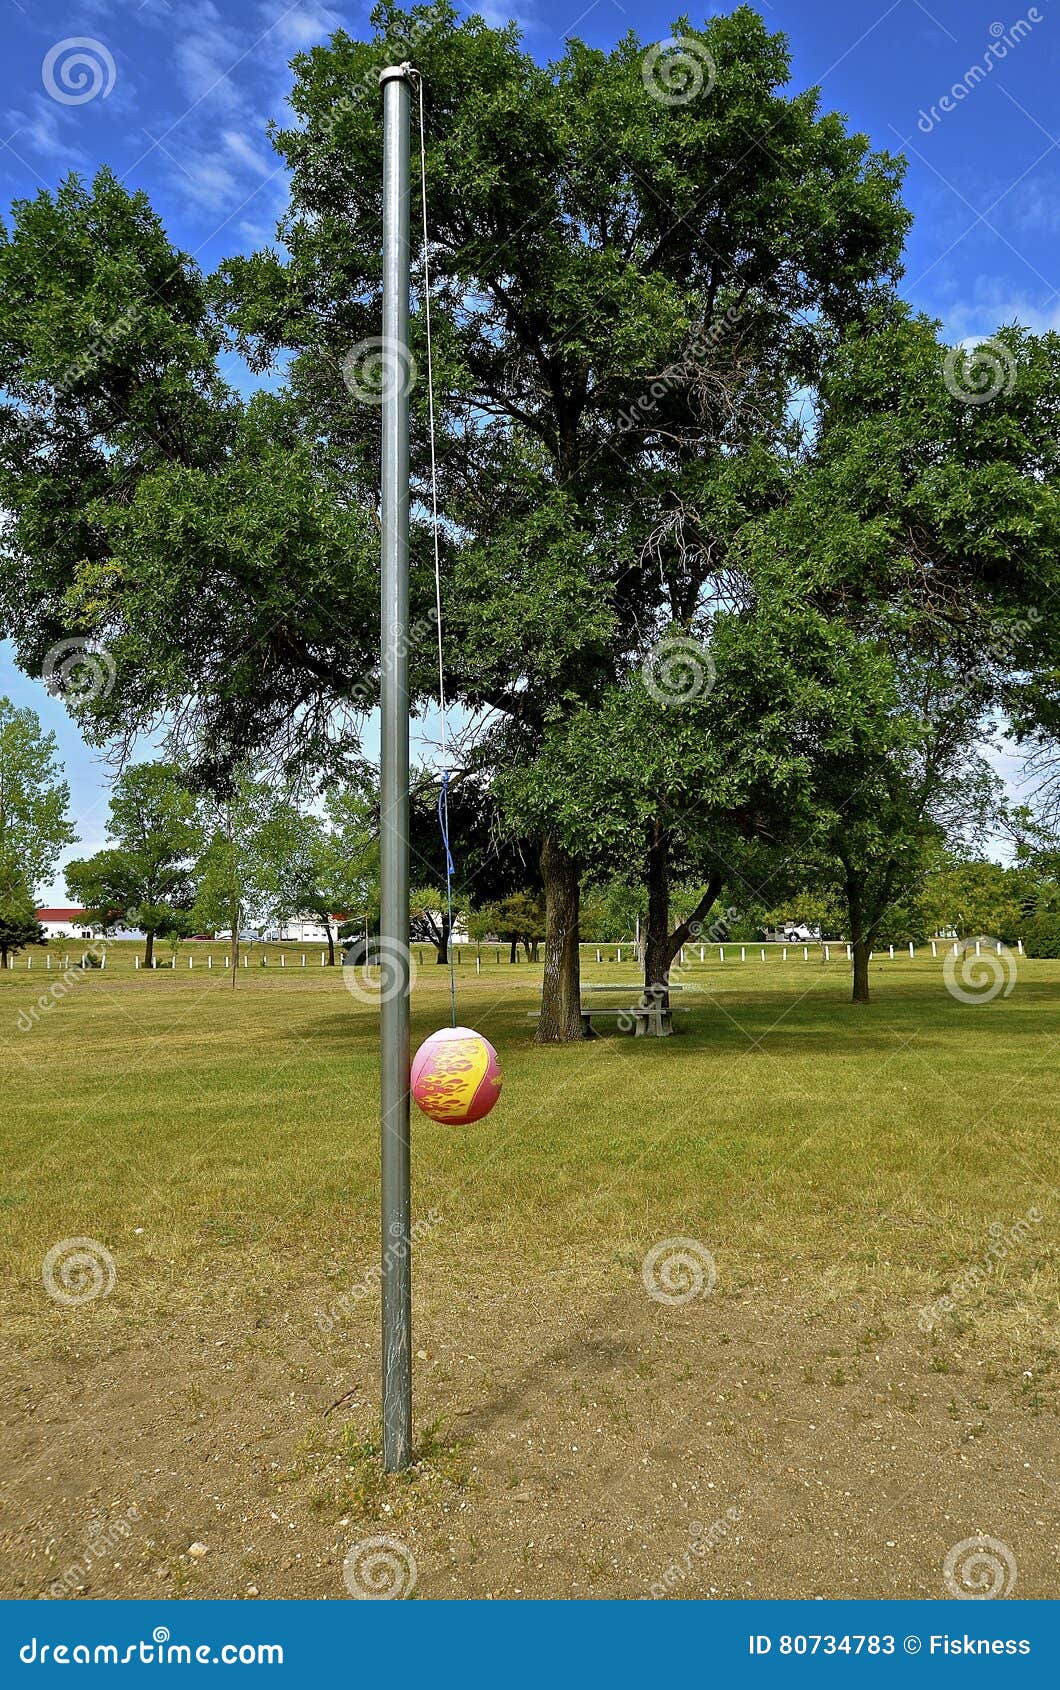 Game of tether ball stock image. Image of enjoyment, grass - 80734783